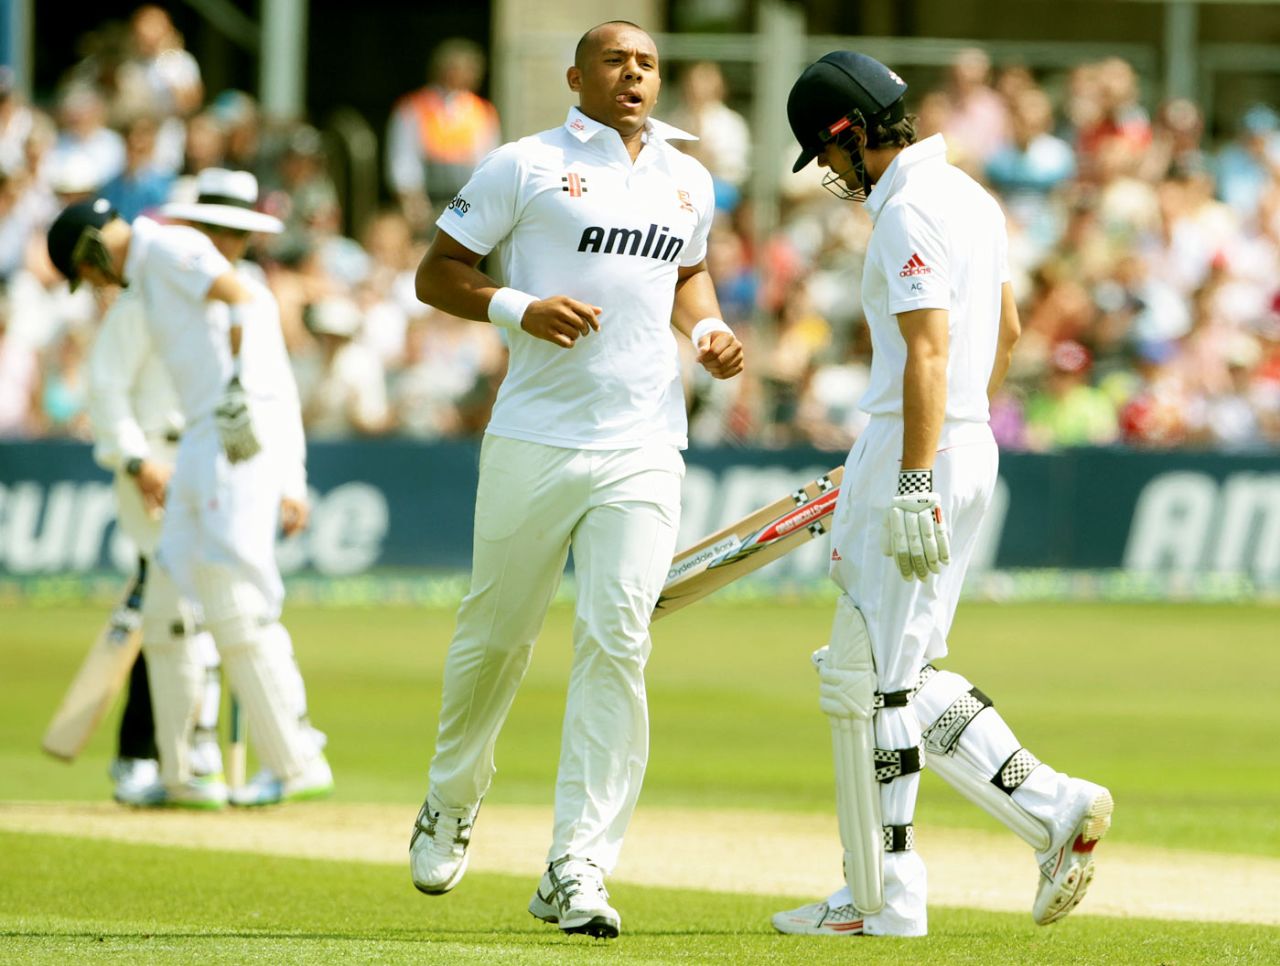 Tymal Mills had Alastair Cook caught behind for 18, Essex v England, 1st day, Chelmsford, June 30, 2013